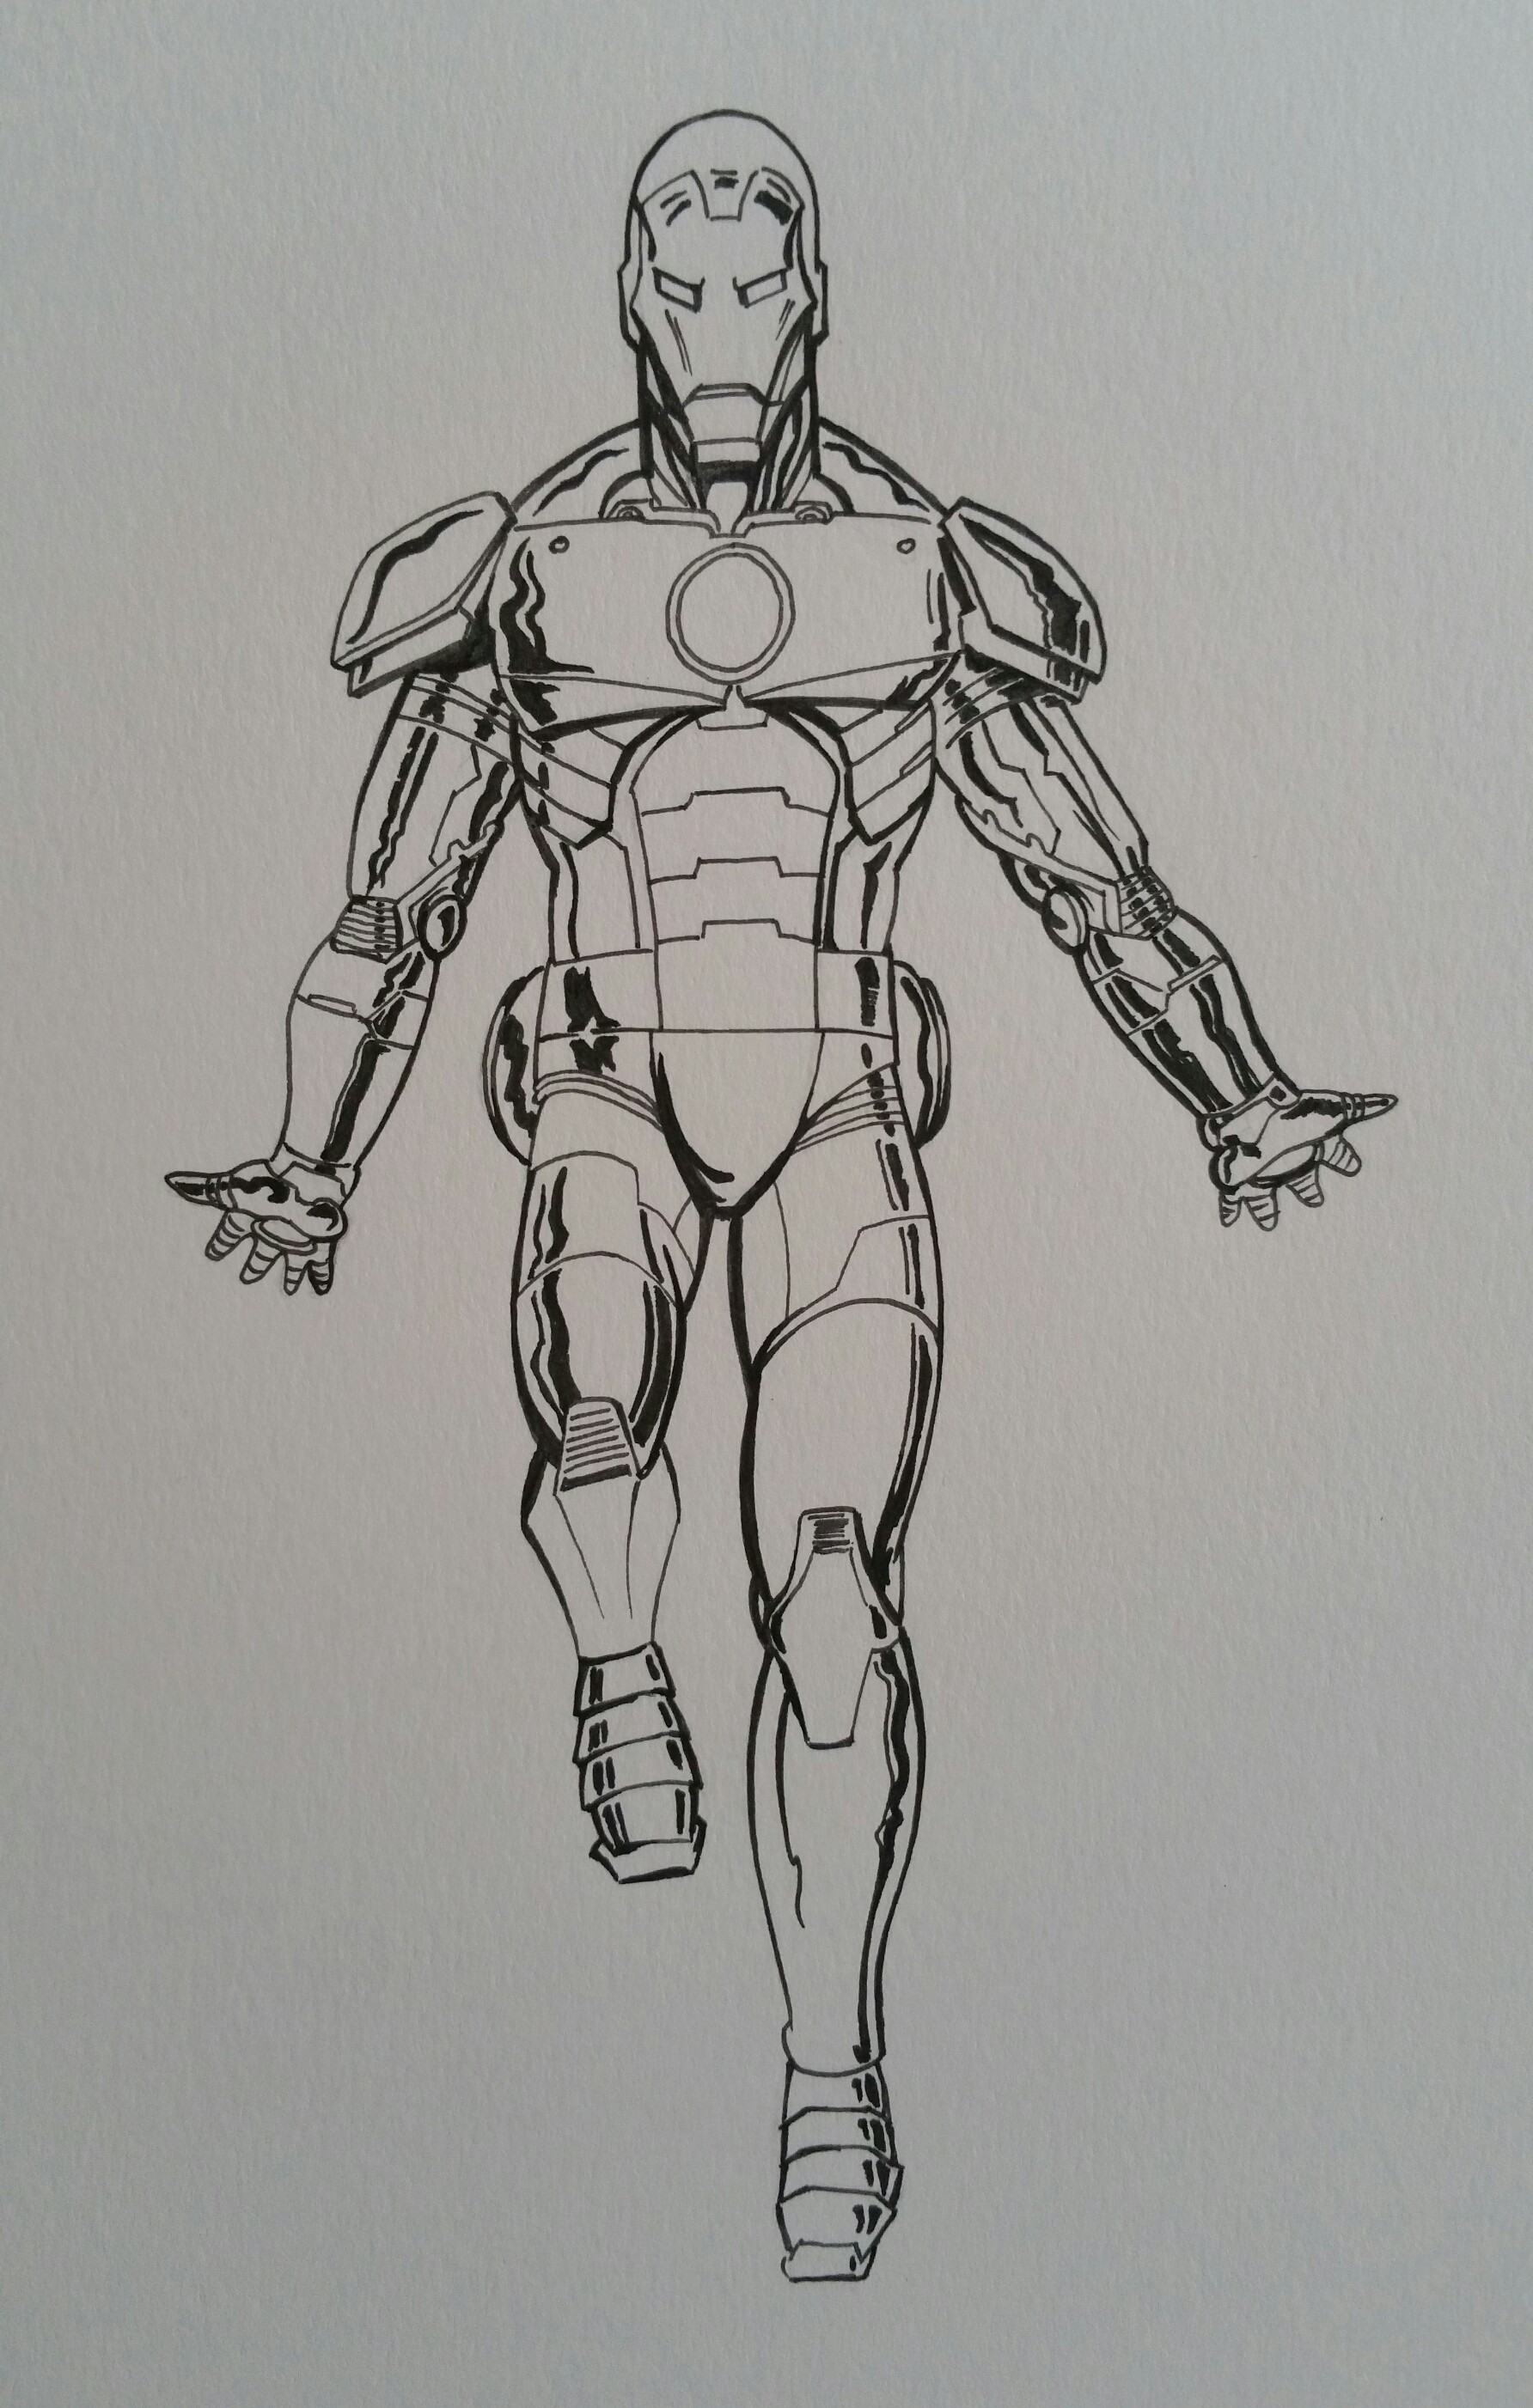 Iron Man Flying Scene Coloring Page  Free Printable Coloring Pages for Kids